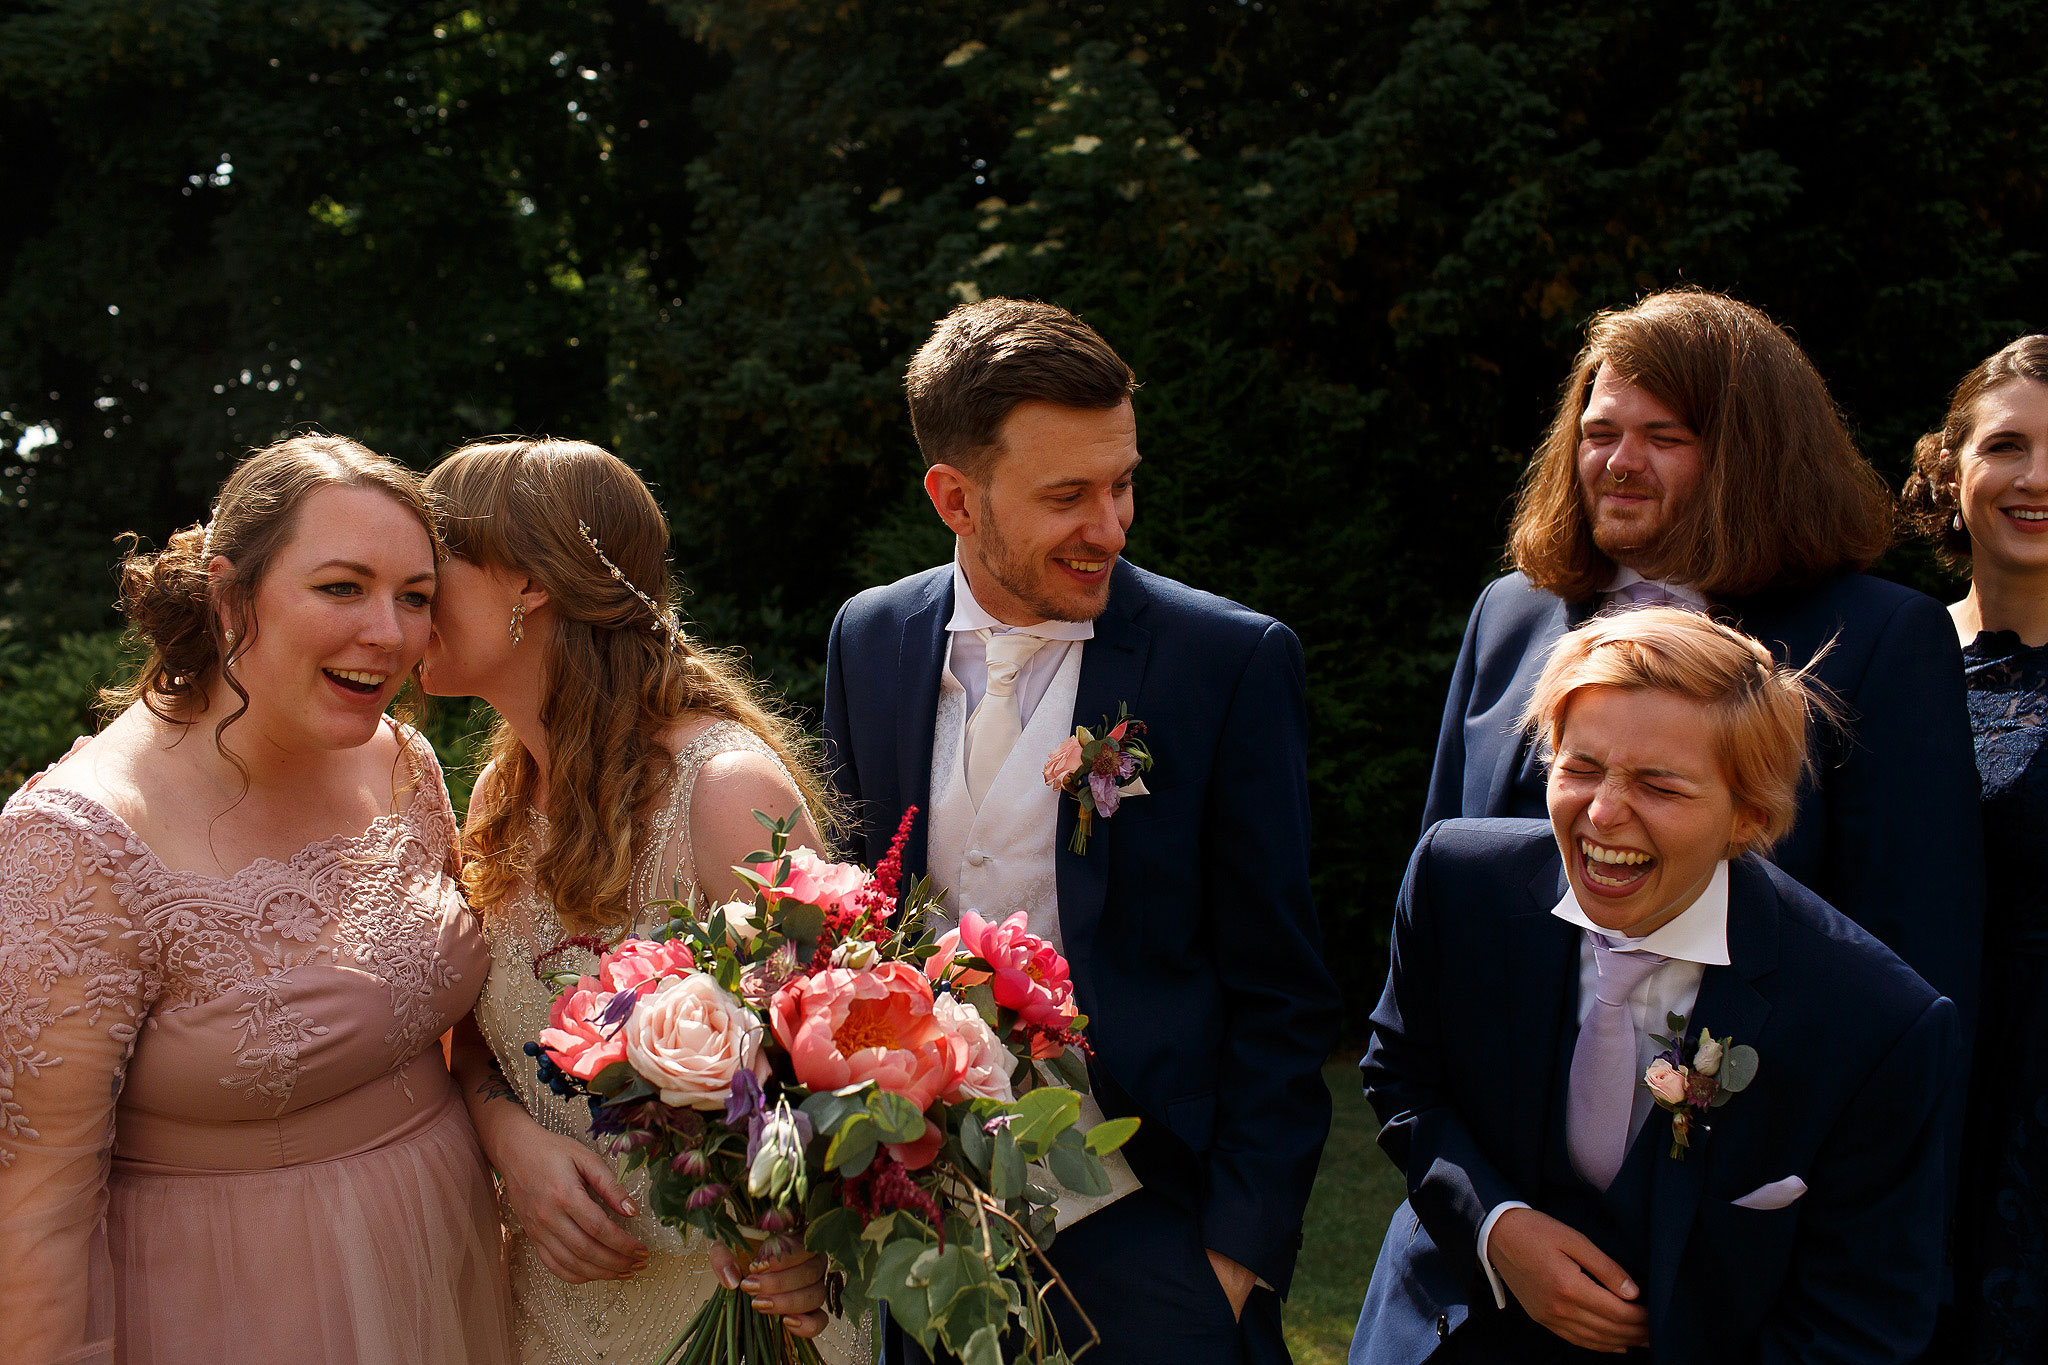 Bridesmaids and groomsmen laughing during bridal party portraits - The Villa at Wrea Green Wedding Photography - Toni Darcy Photography